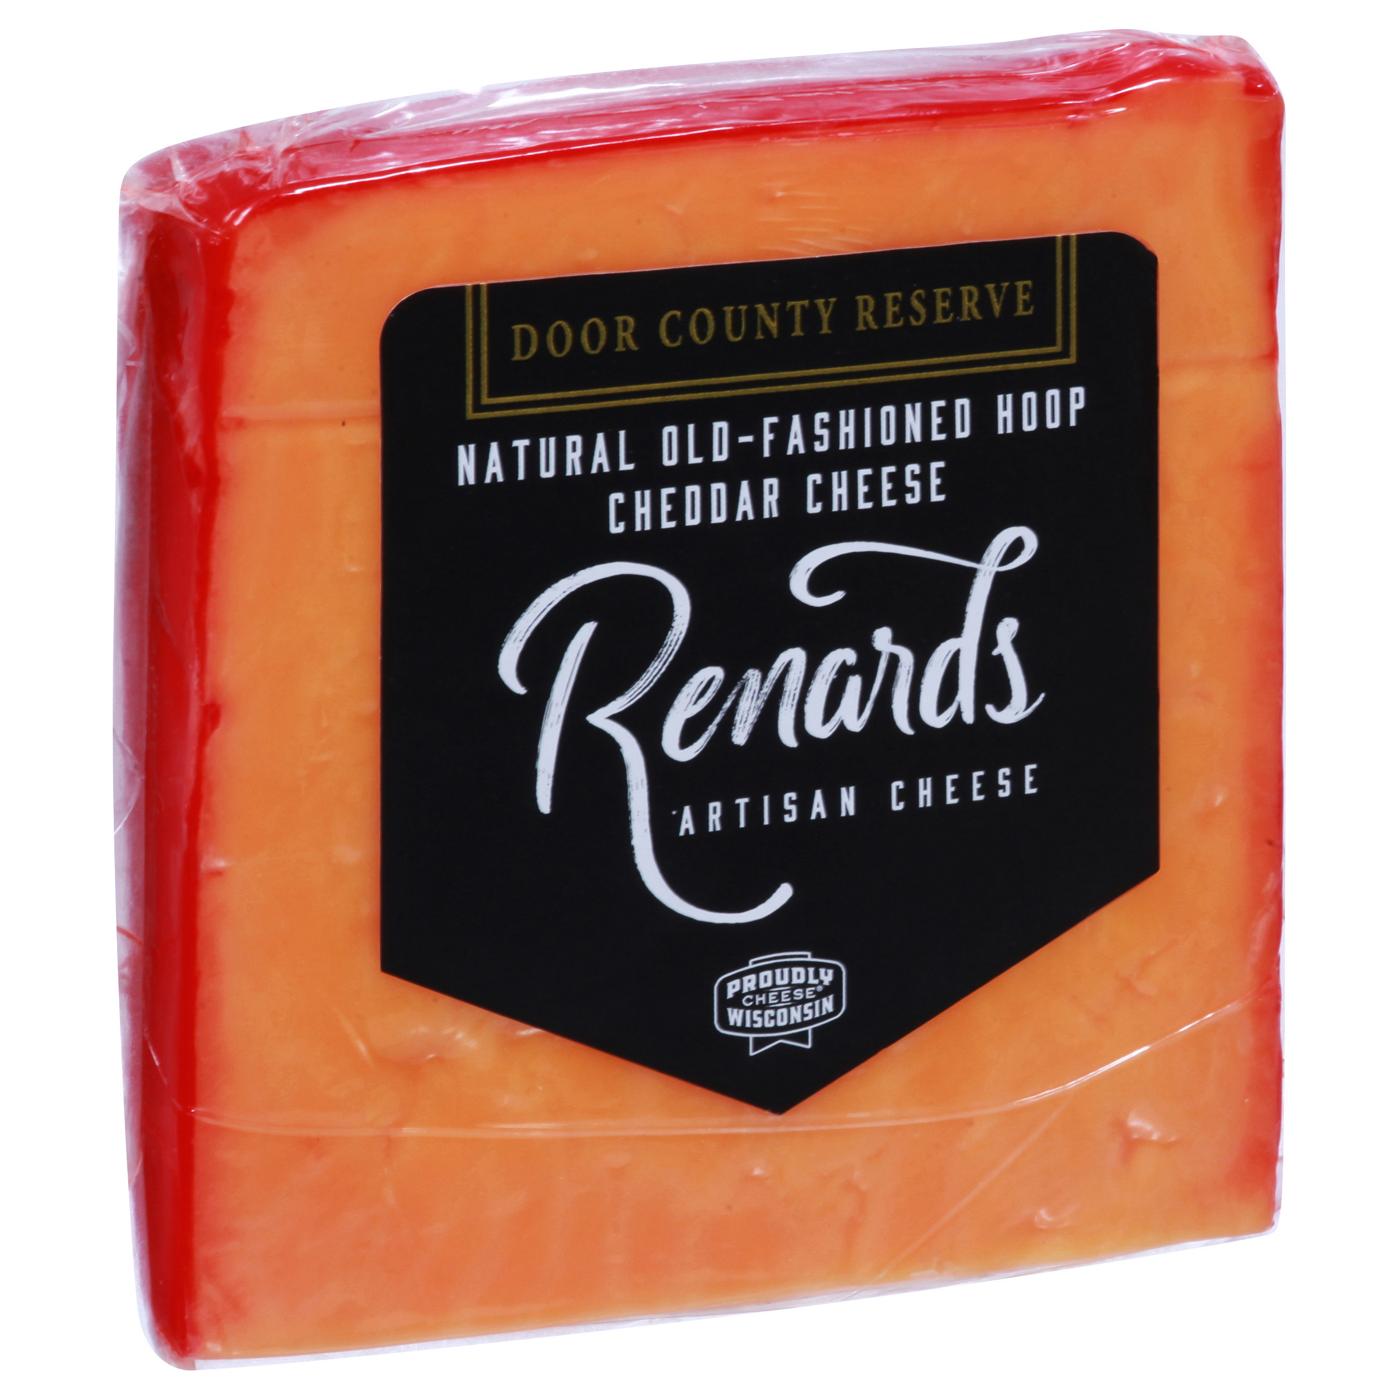 Renard's Artisan Cheese Natural Old-Fashioned Hoop Cheddar Cheese; image 2 of 3